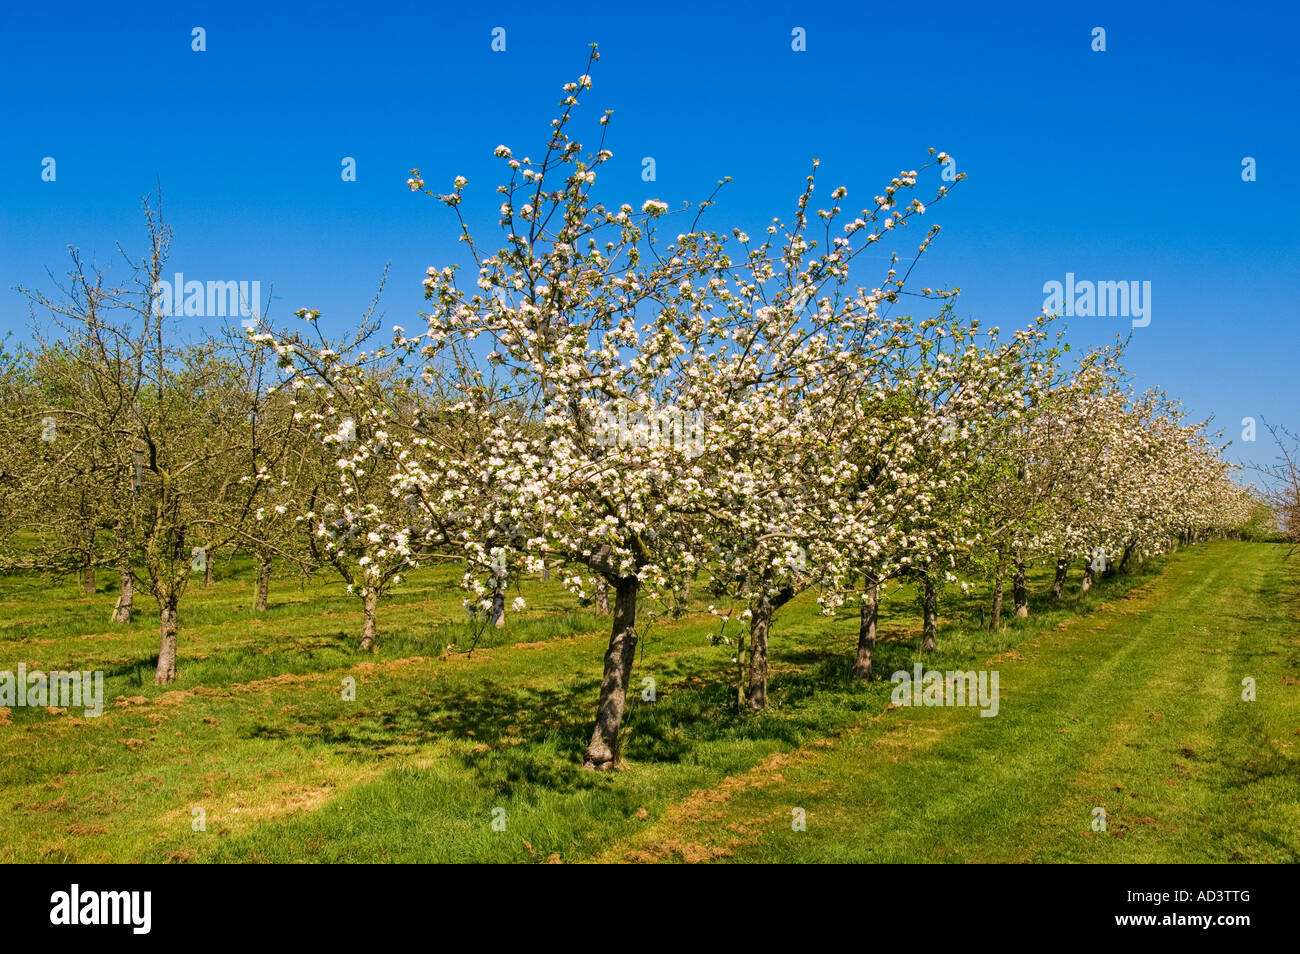 Spring blossom in Stewley cider apple orchard near Taunton Somerset England Stock Photo